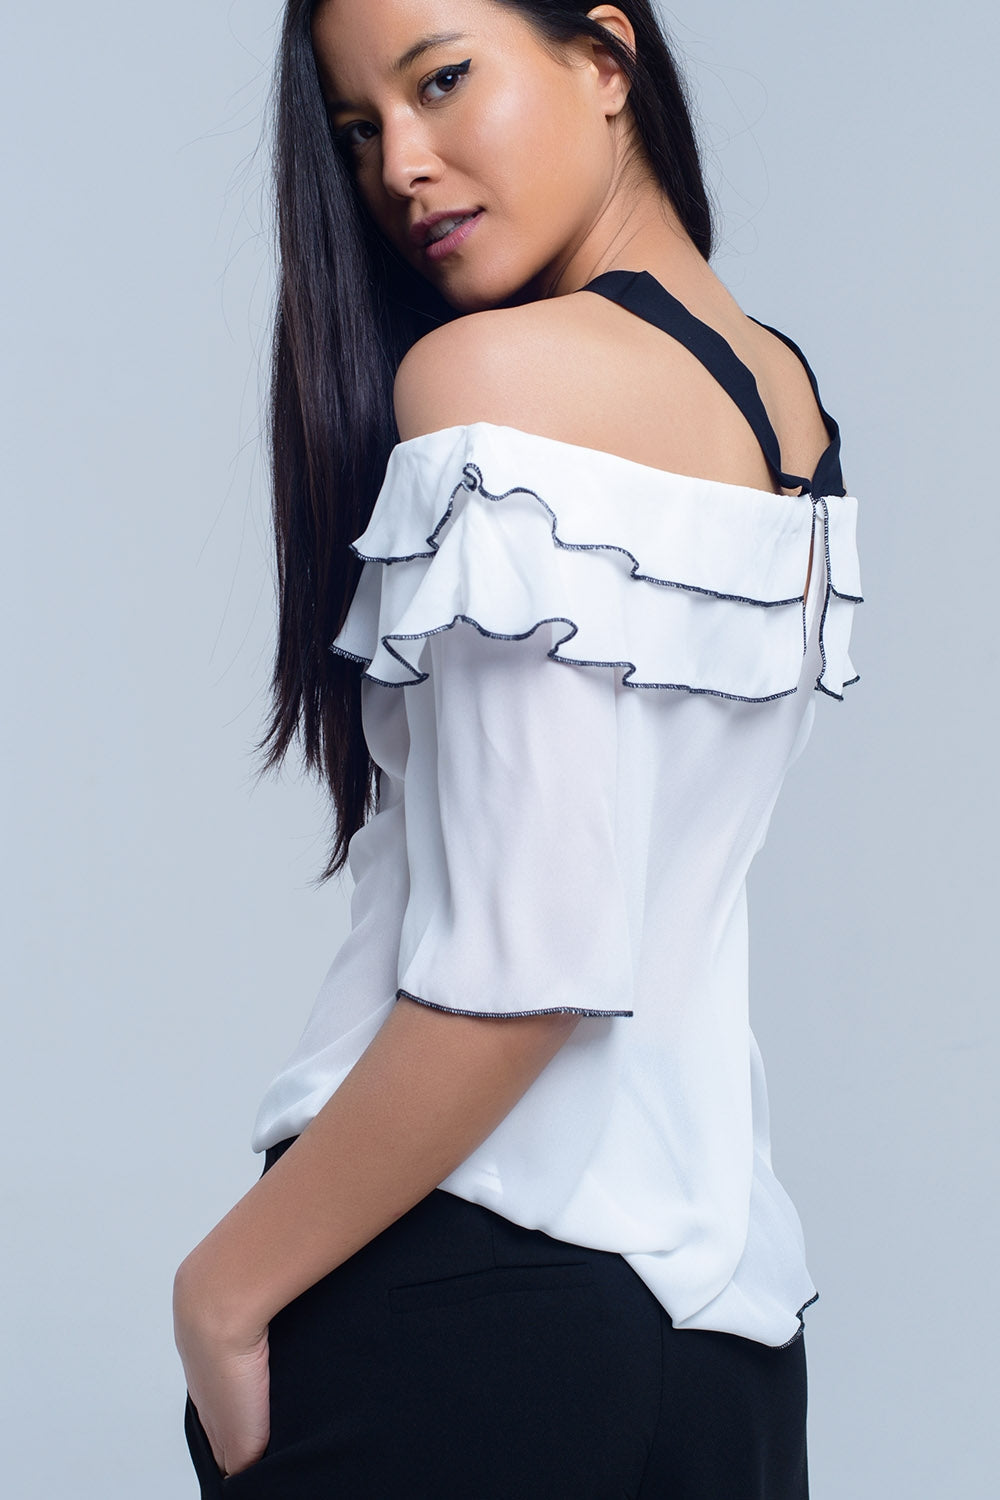 White Off Shoulder Top With Black Contrast Trim